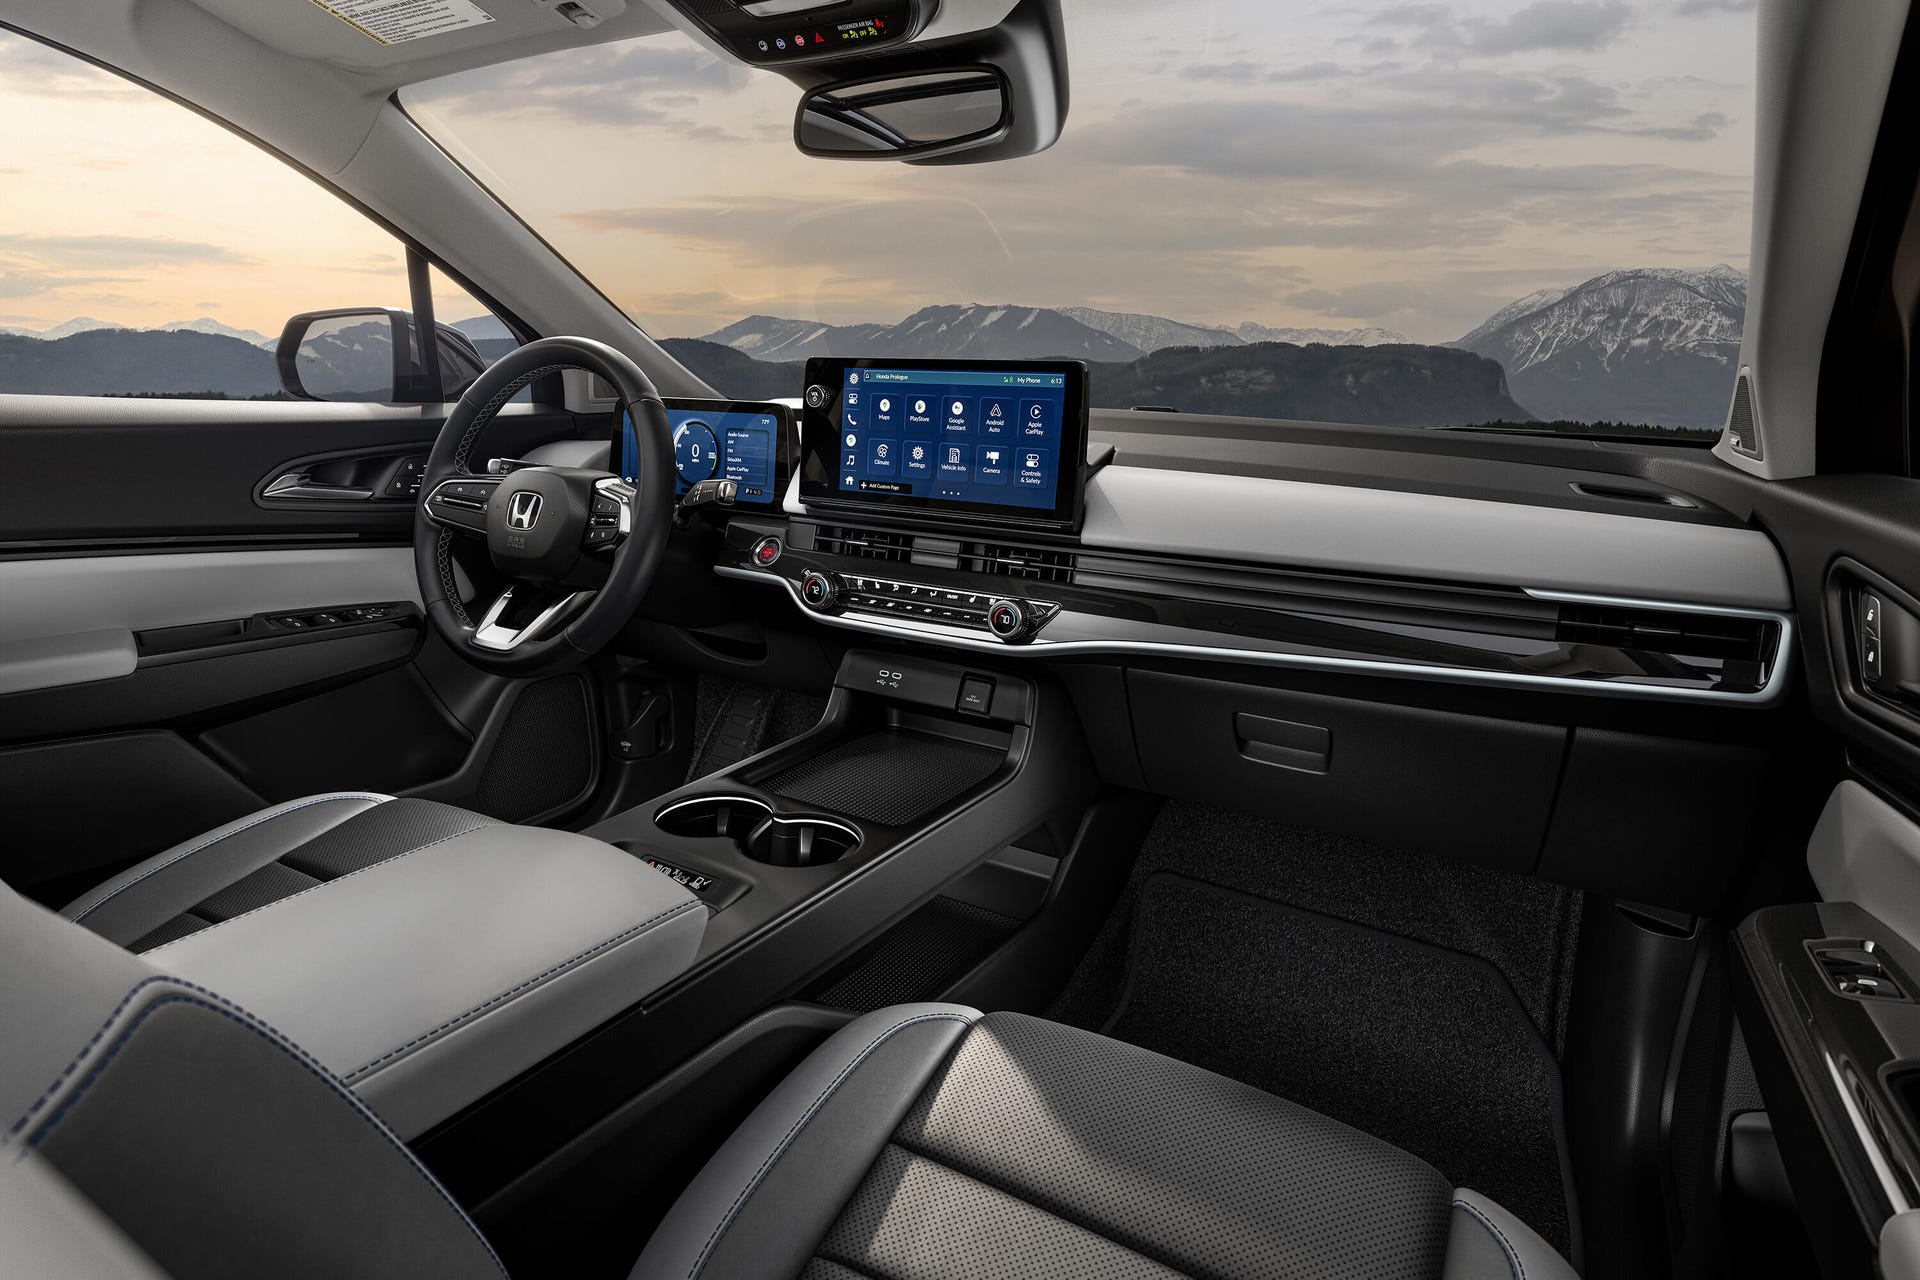 Prologue EV's interior with dual screen infotainment